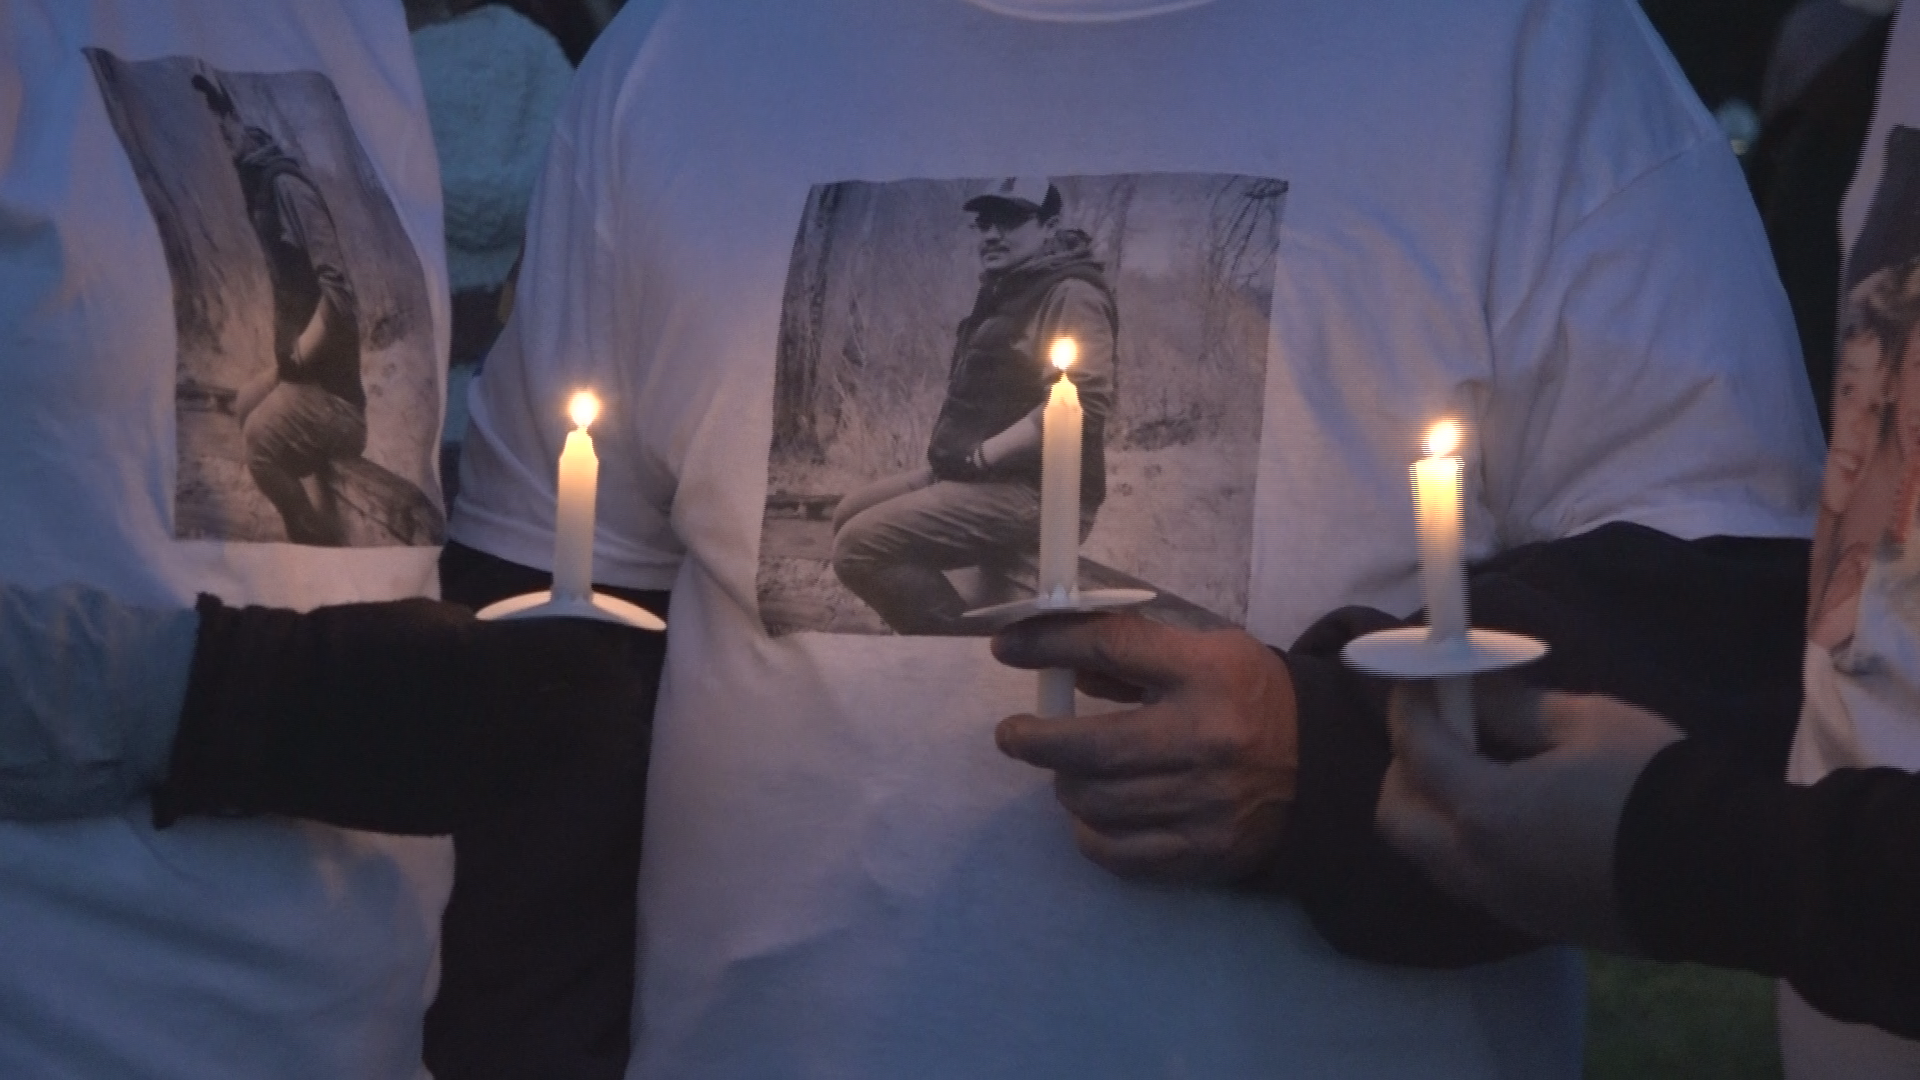 Family members, friends and community members came together to remember Jason Fox's life